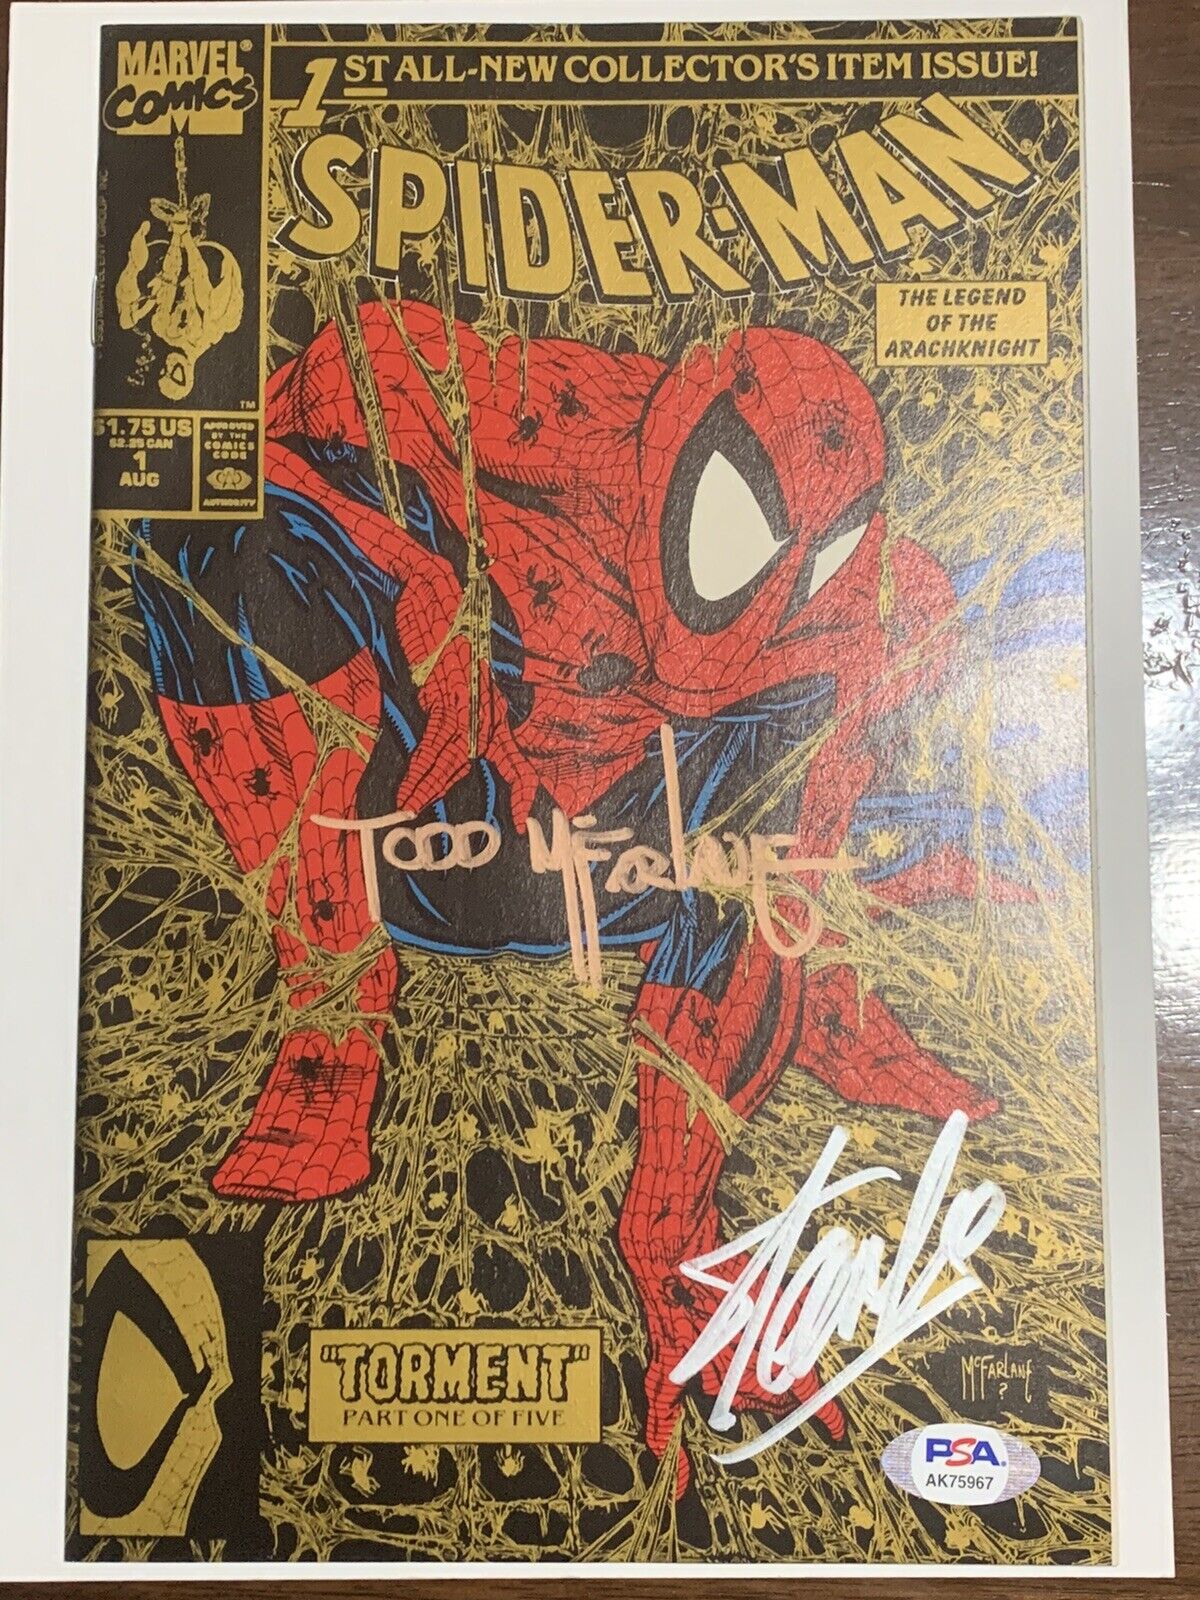 SPIDER-MAN # 1 GOLD SIGNED STAN LEE & TODD MCFARLANE PSA/DNA AUTHENTIC NM